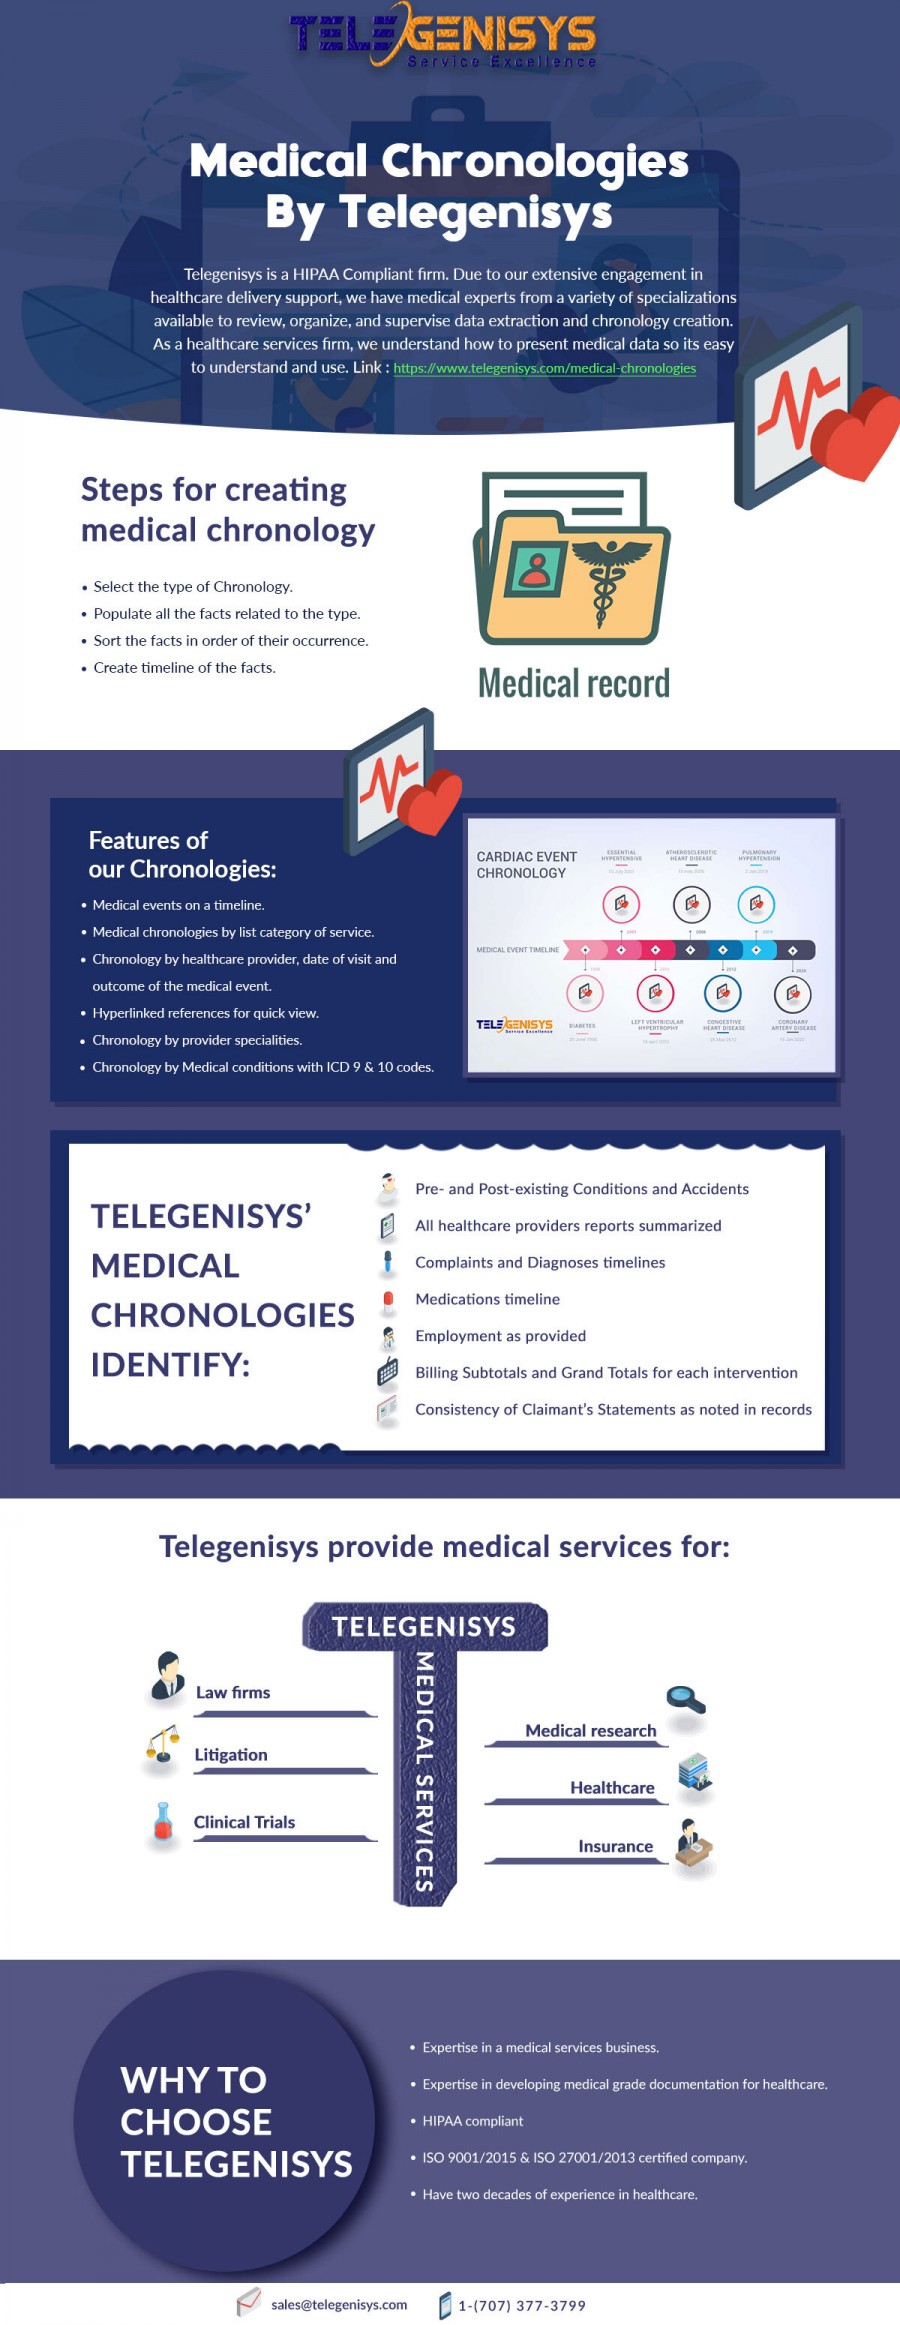 Unique Features of  Medical Chronologies by Telegenisys Inc